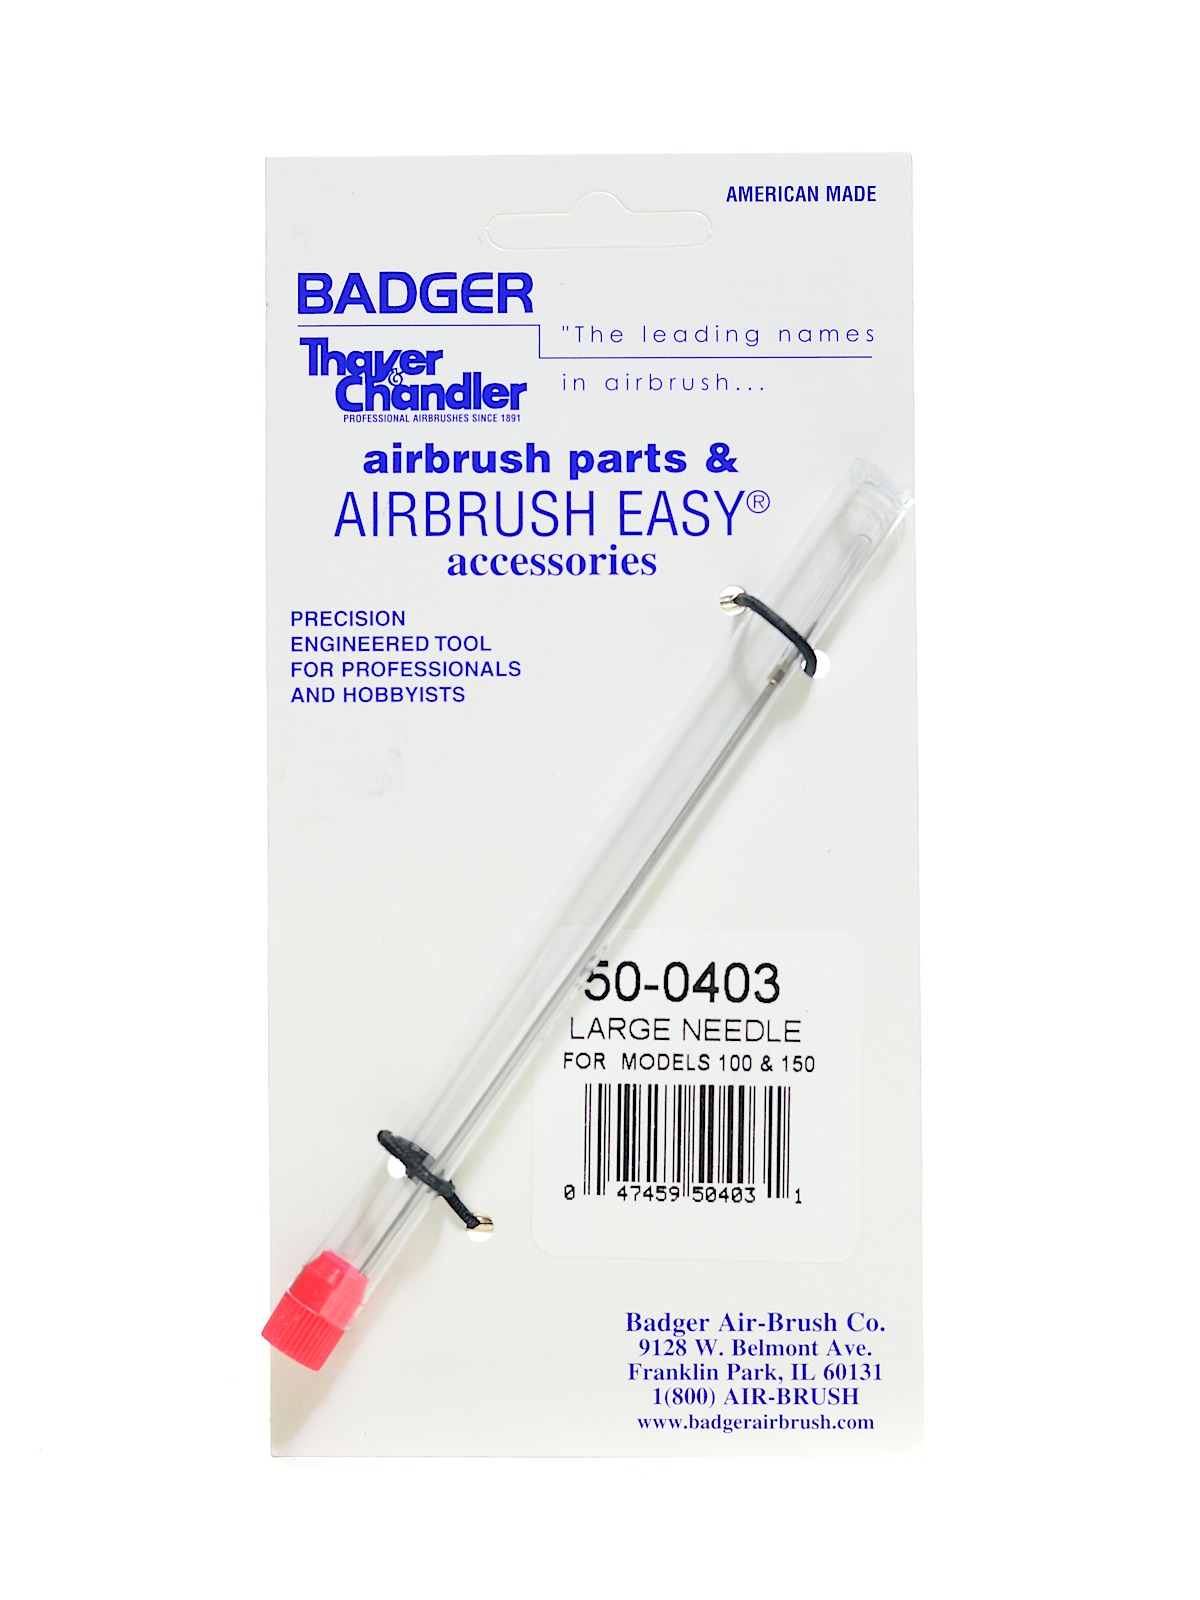 Badger Air-Brush Company Medium Needle for Model 100 and 150